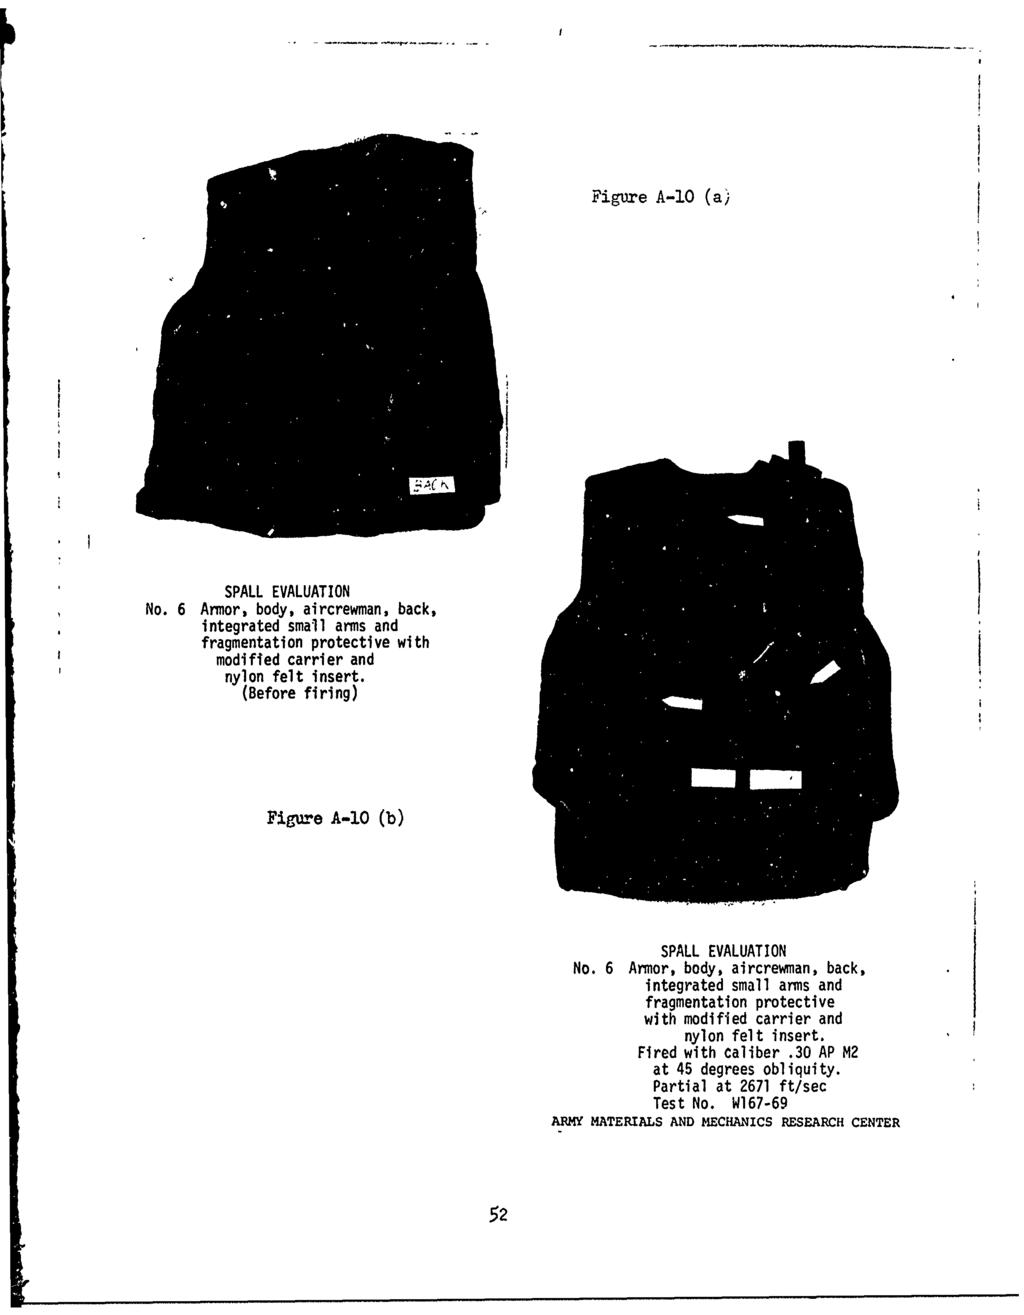 Figure A-1O (a) No. SPALL EVALUATION 6 Armor, body, aircrewman, back, integrated small arms and fragmentation protective with modified carrier and nylon felt insert.